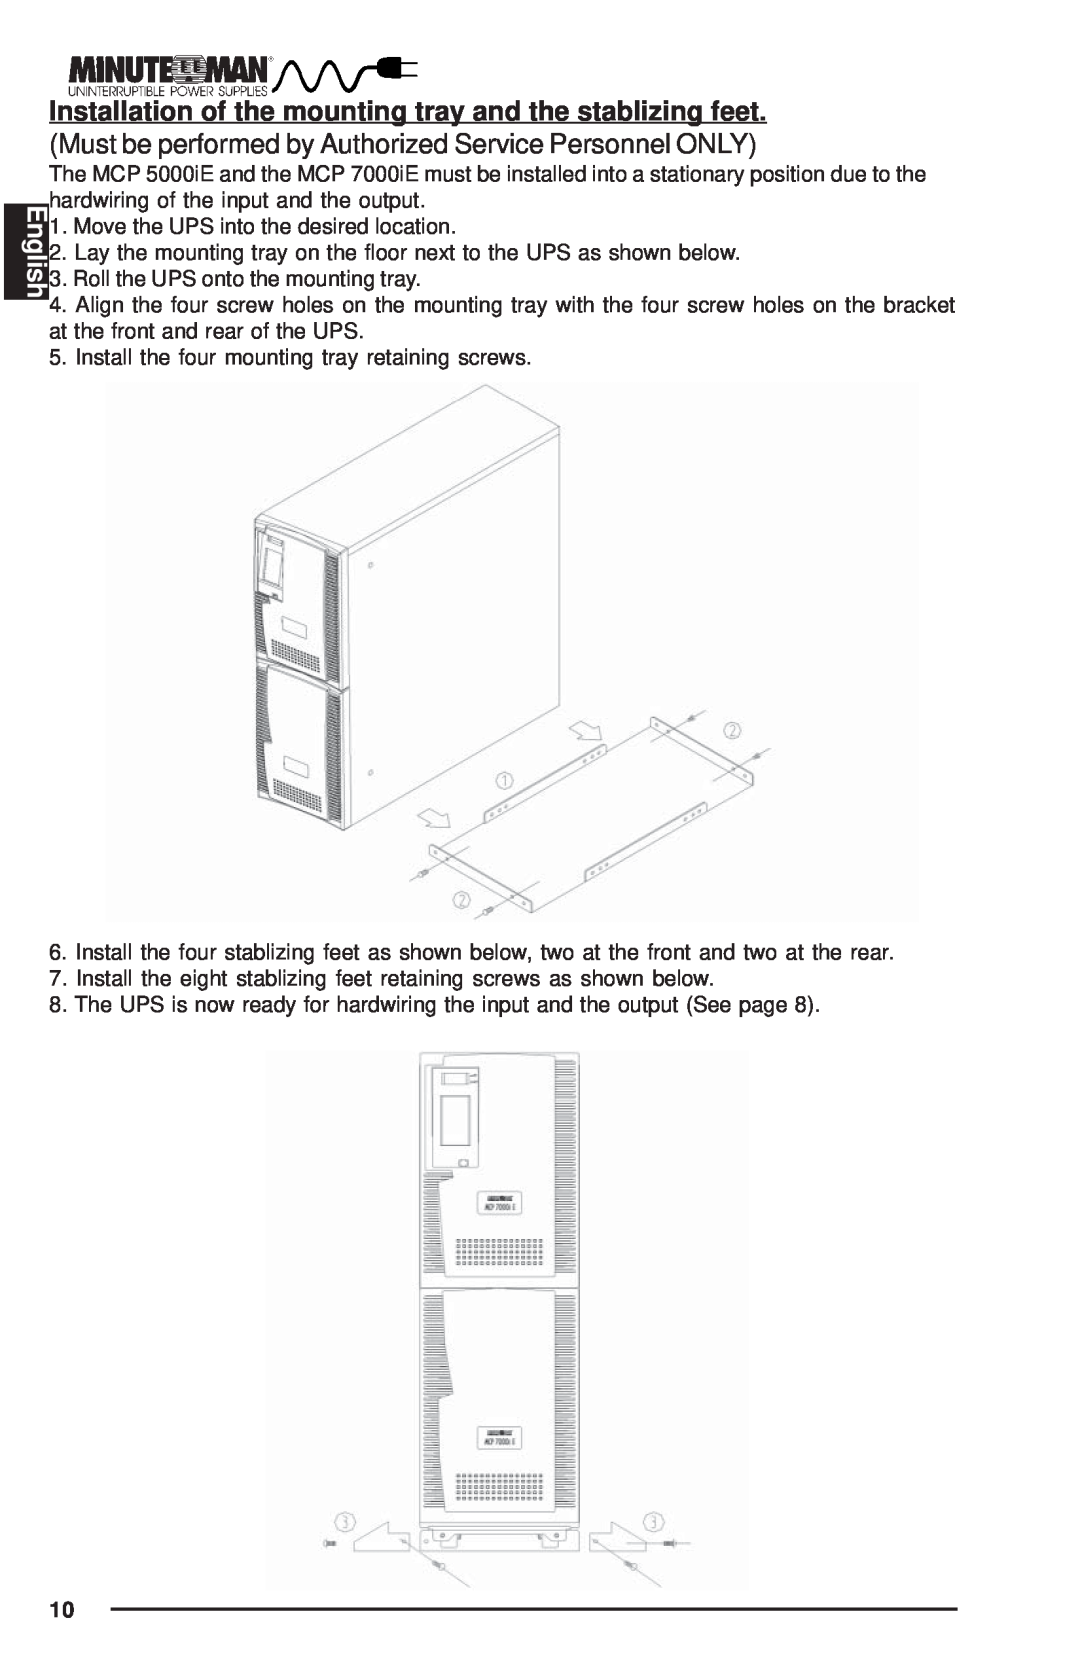 Minuteman UPS MCP-E user manual Installation of the mounting tray and the stablizing feet, English 